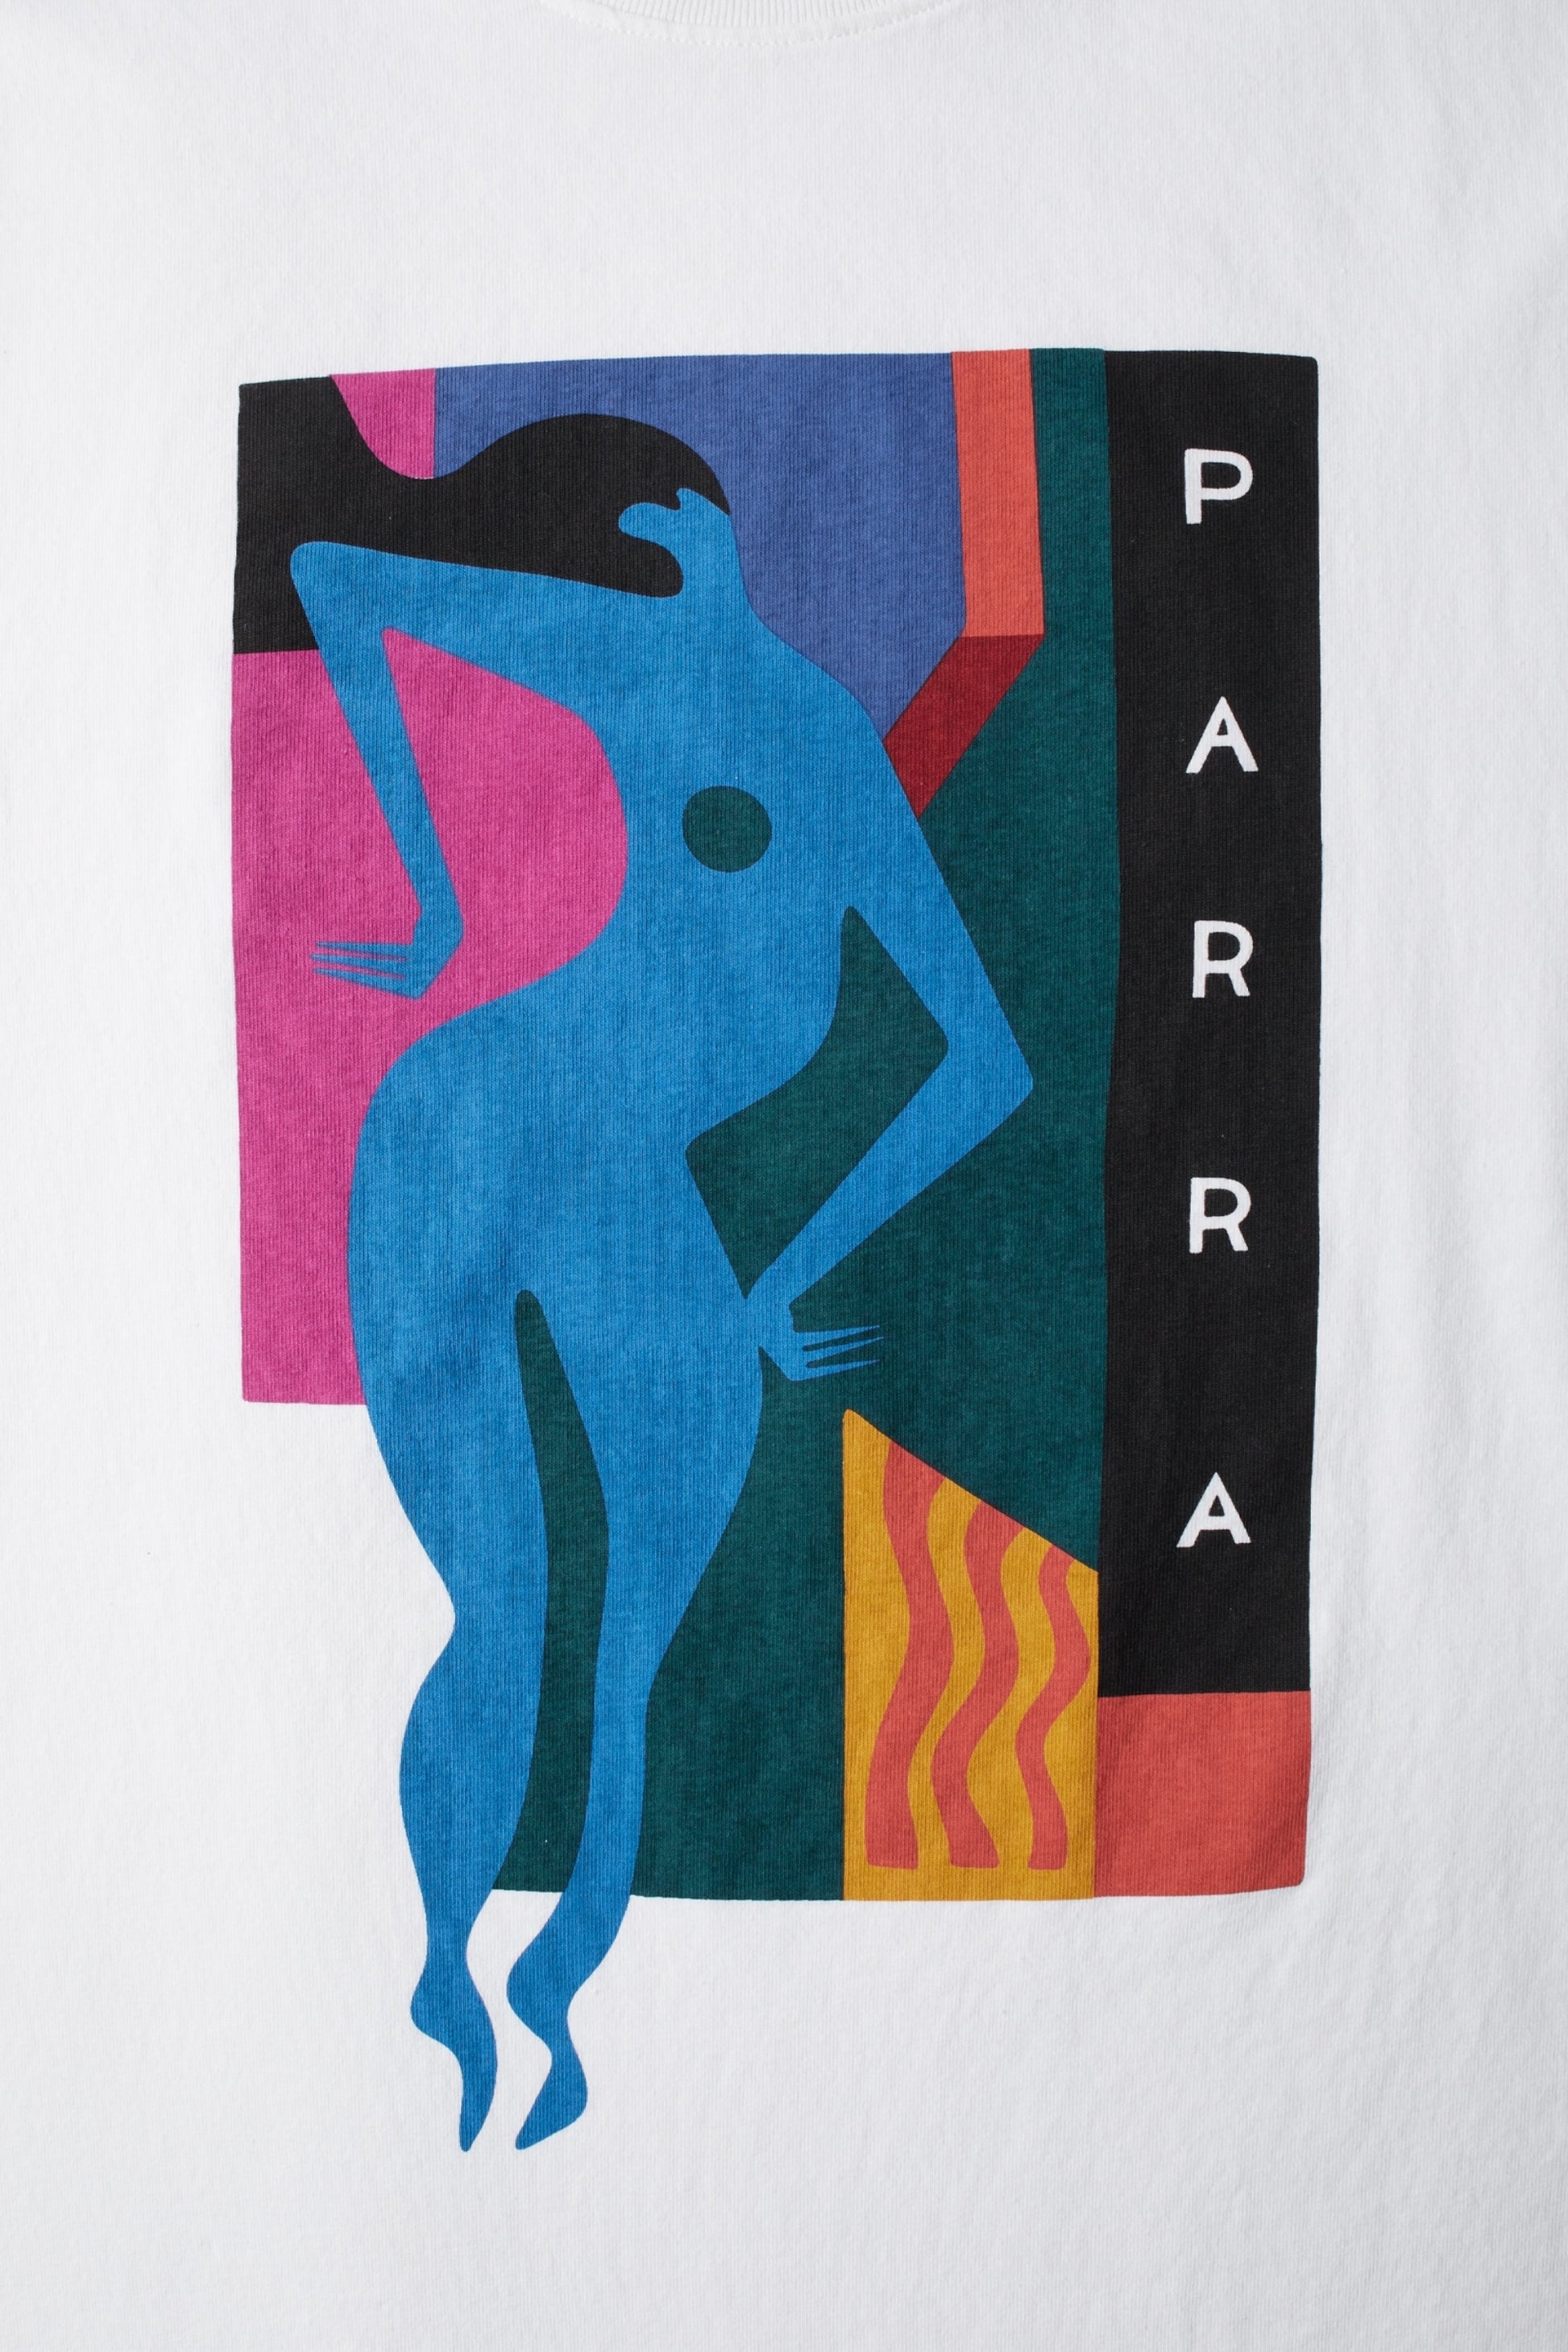 Parra - Beached And Blank T-Shirt (White)